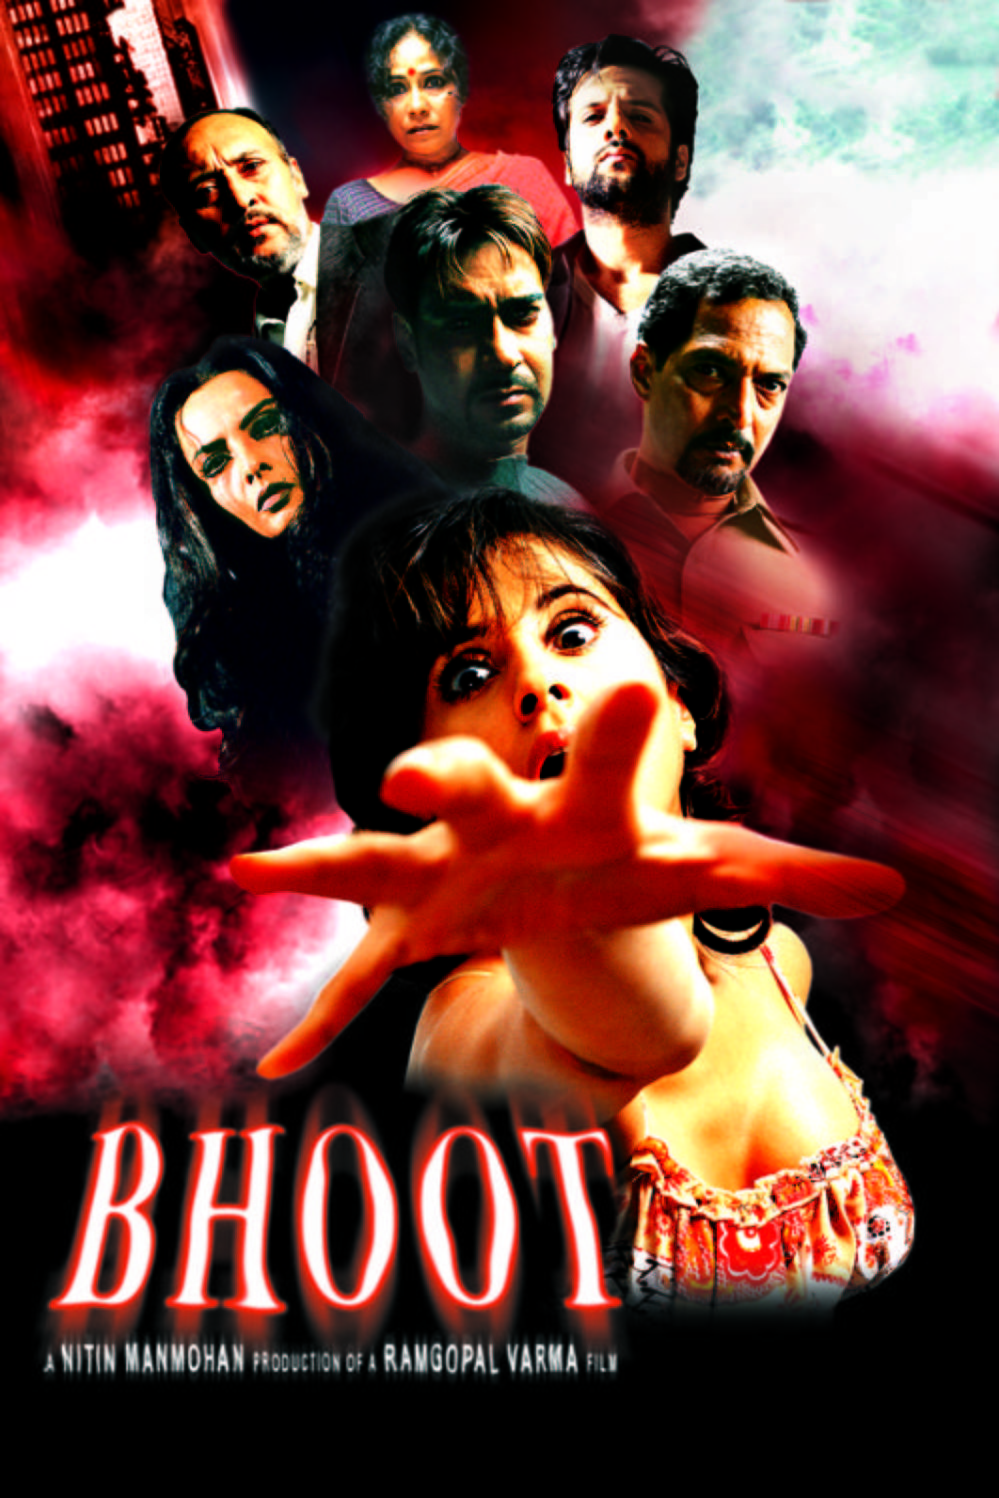 Hindi poster of the movie Bhoot